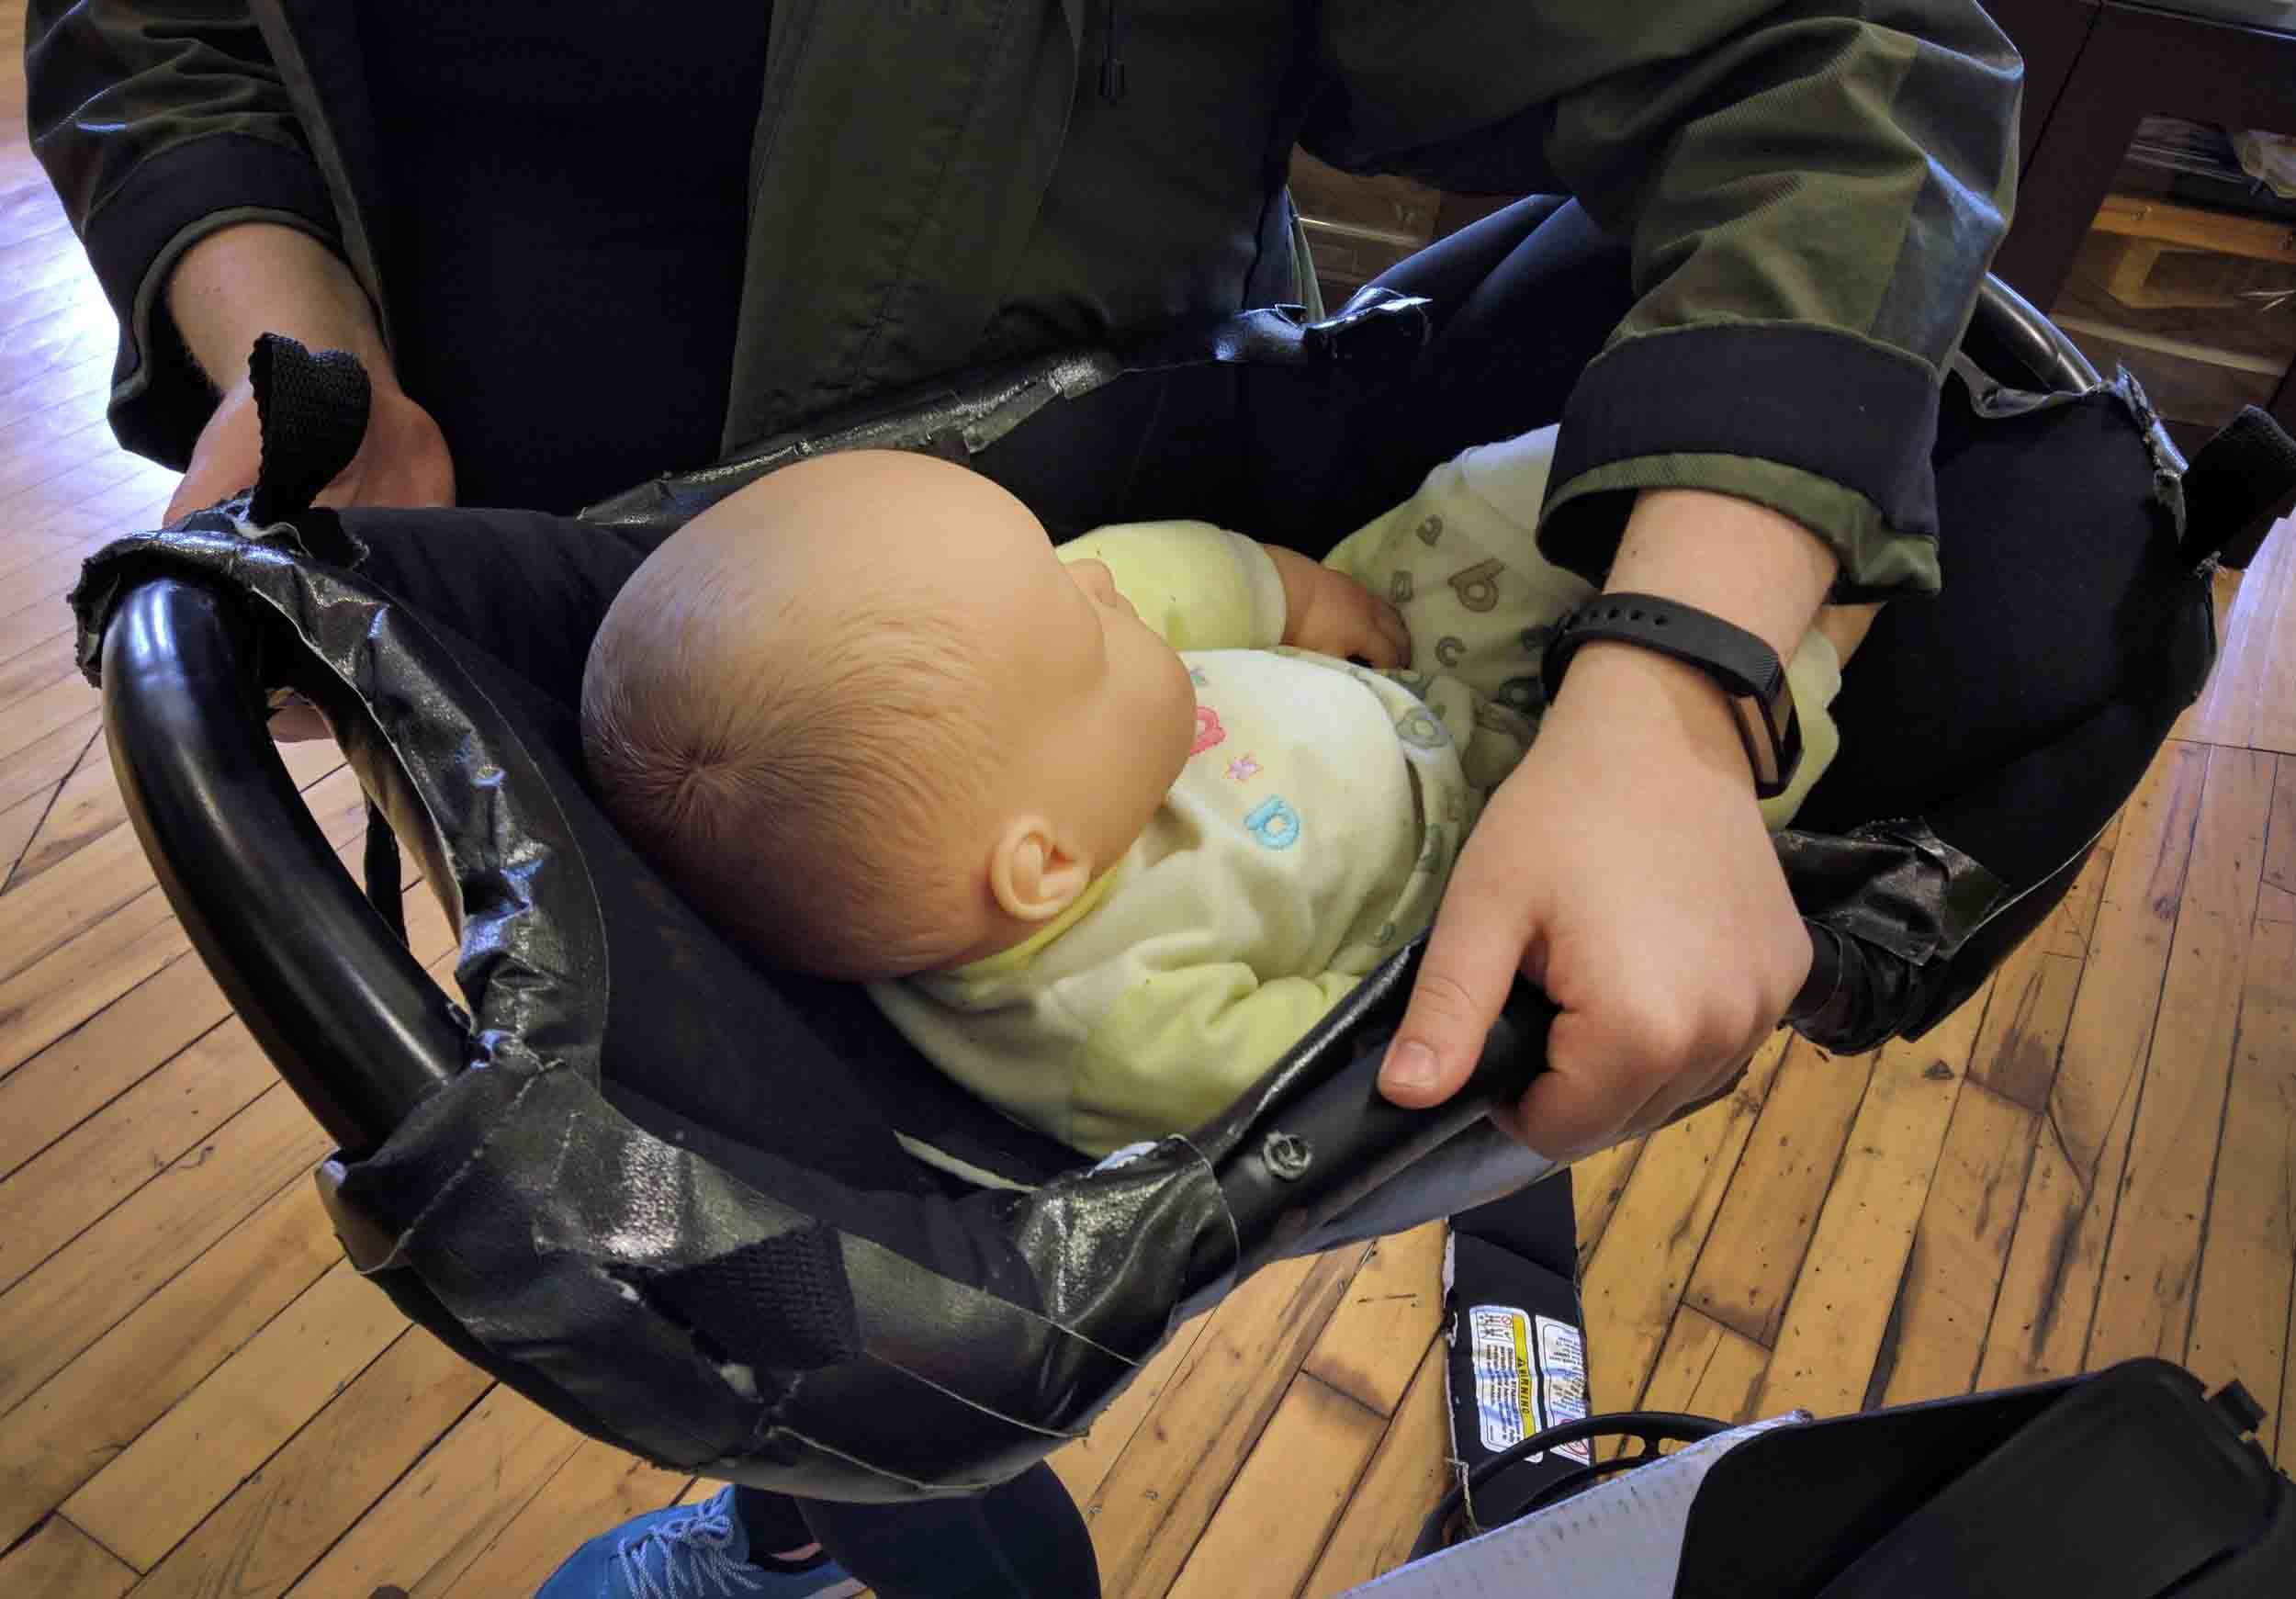  Versatile grab points provide comfort options for holding baby 